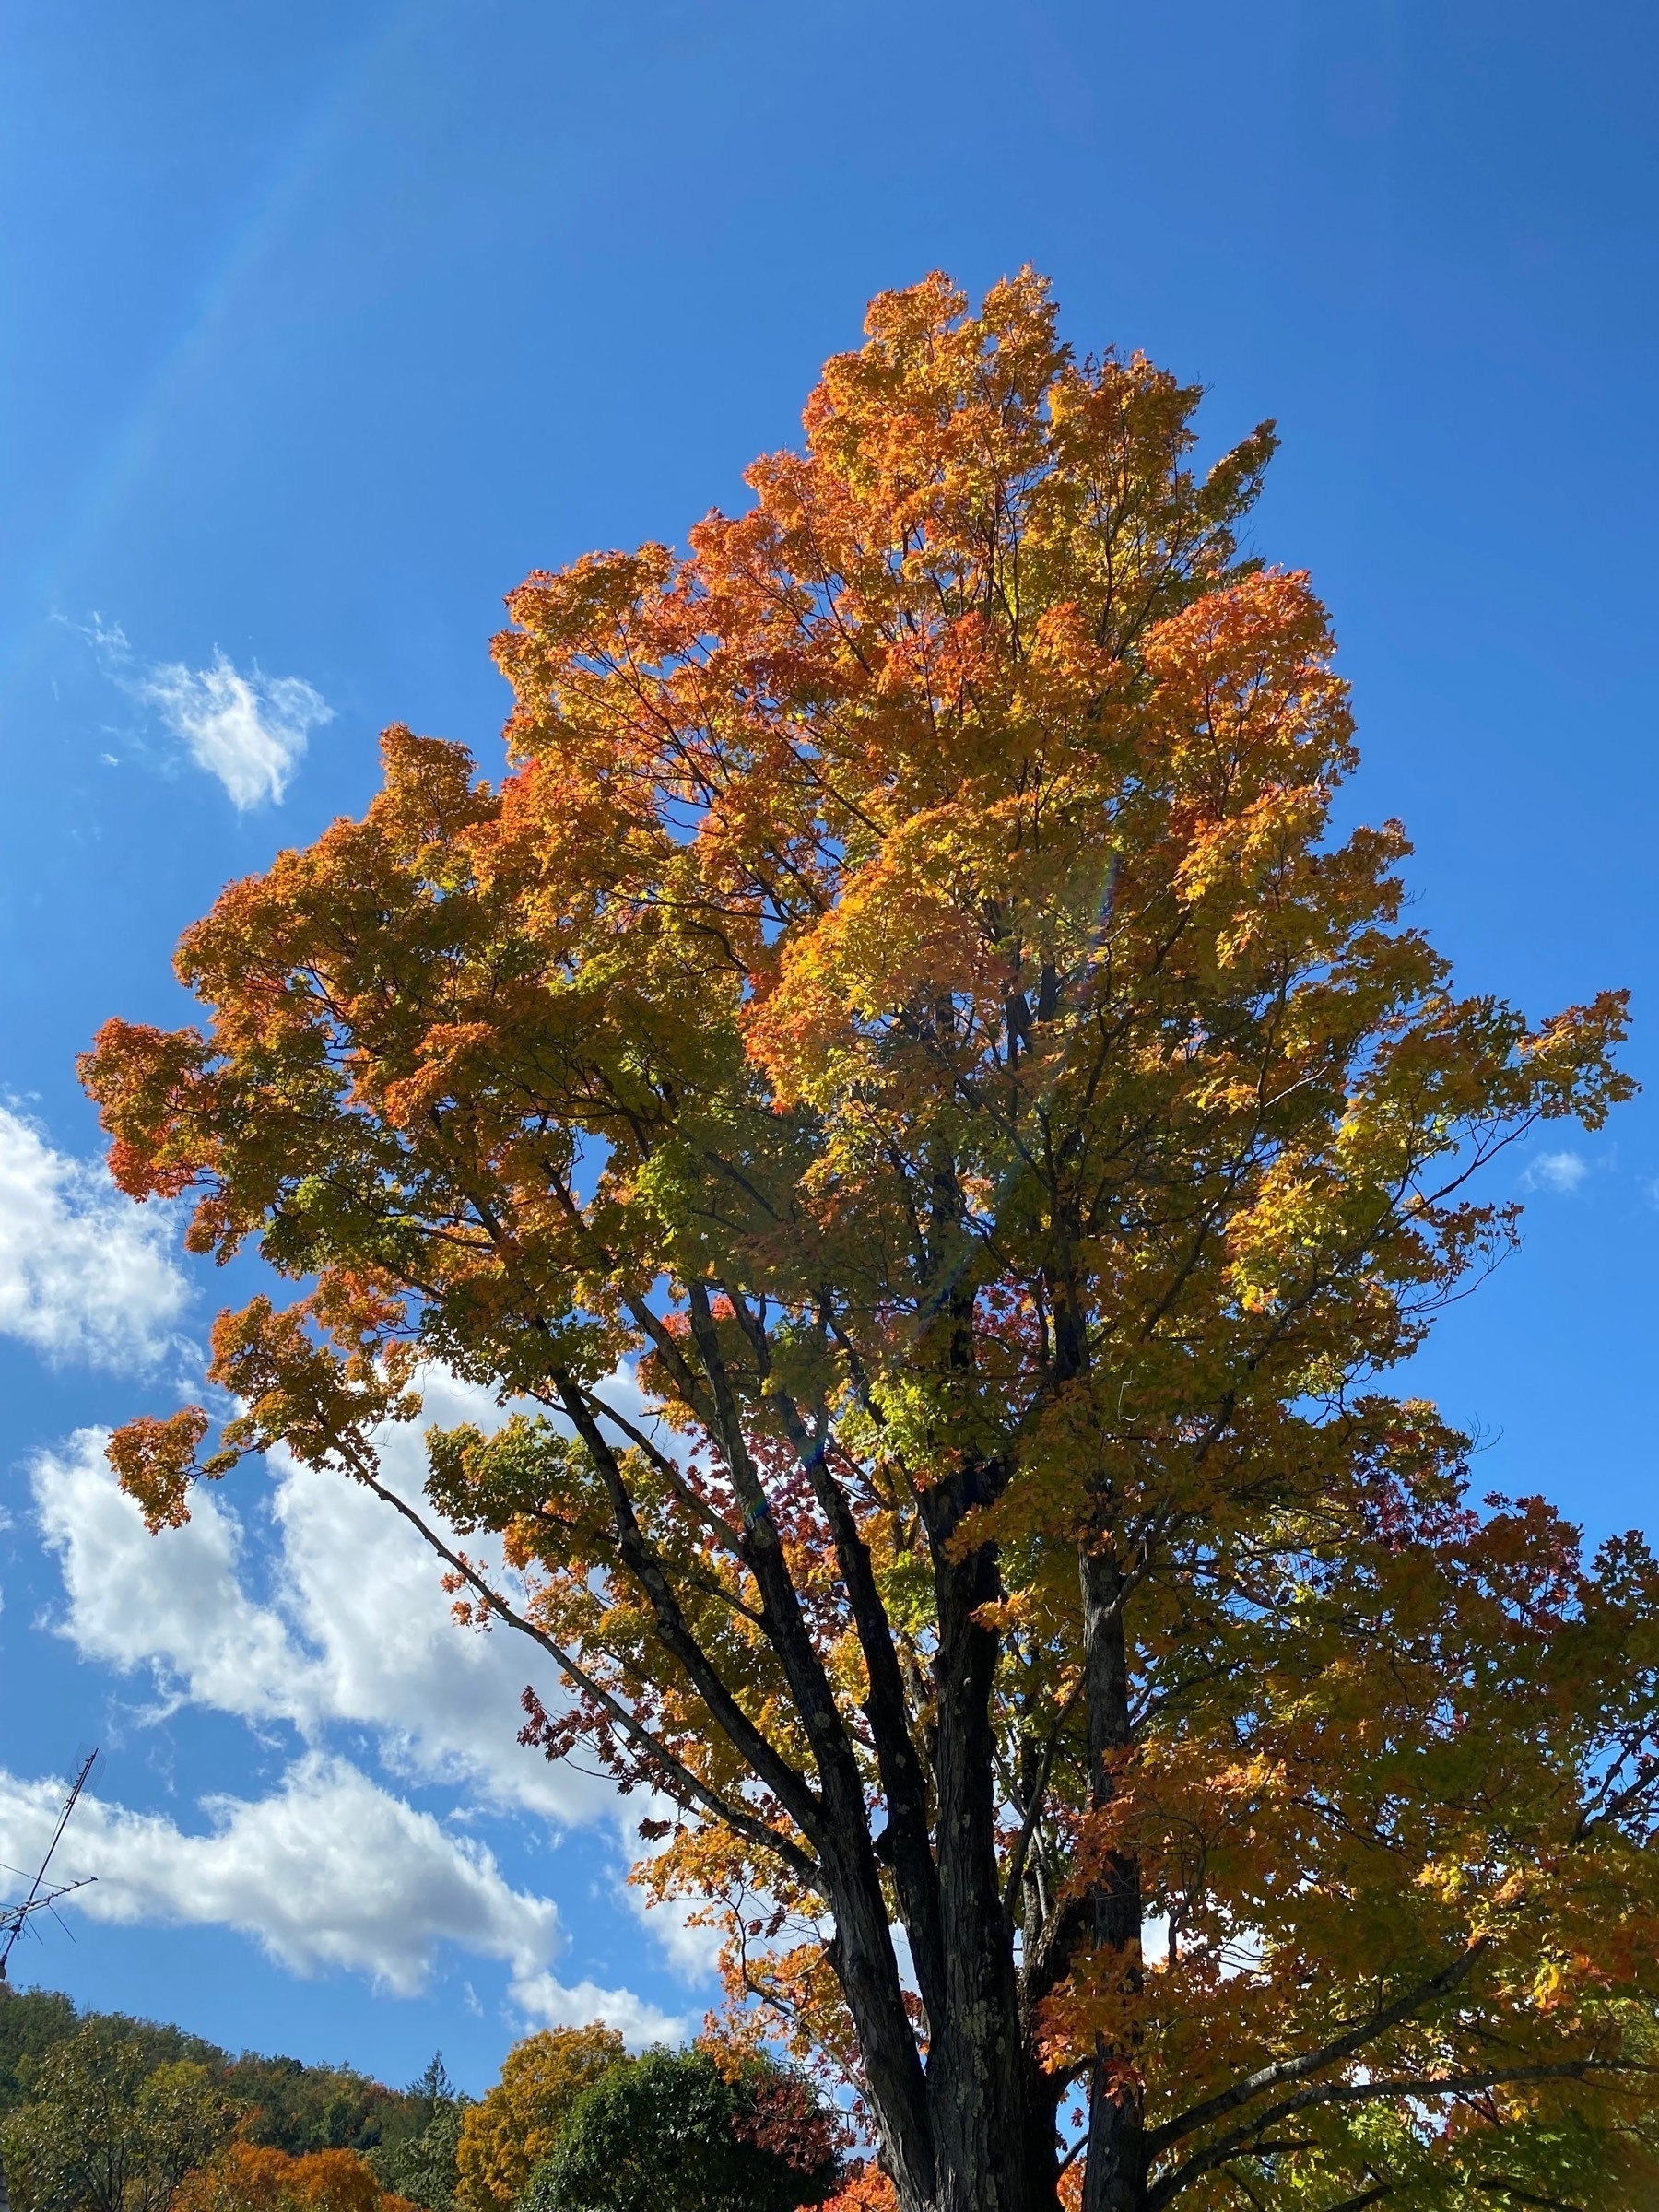 A tall tree with turning leaves against a blue sky.